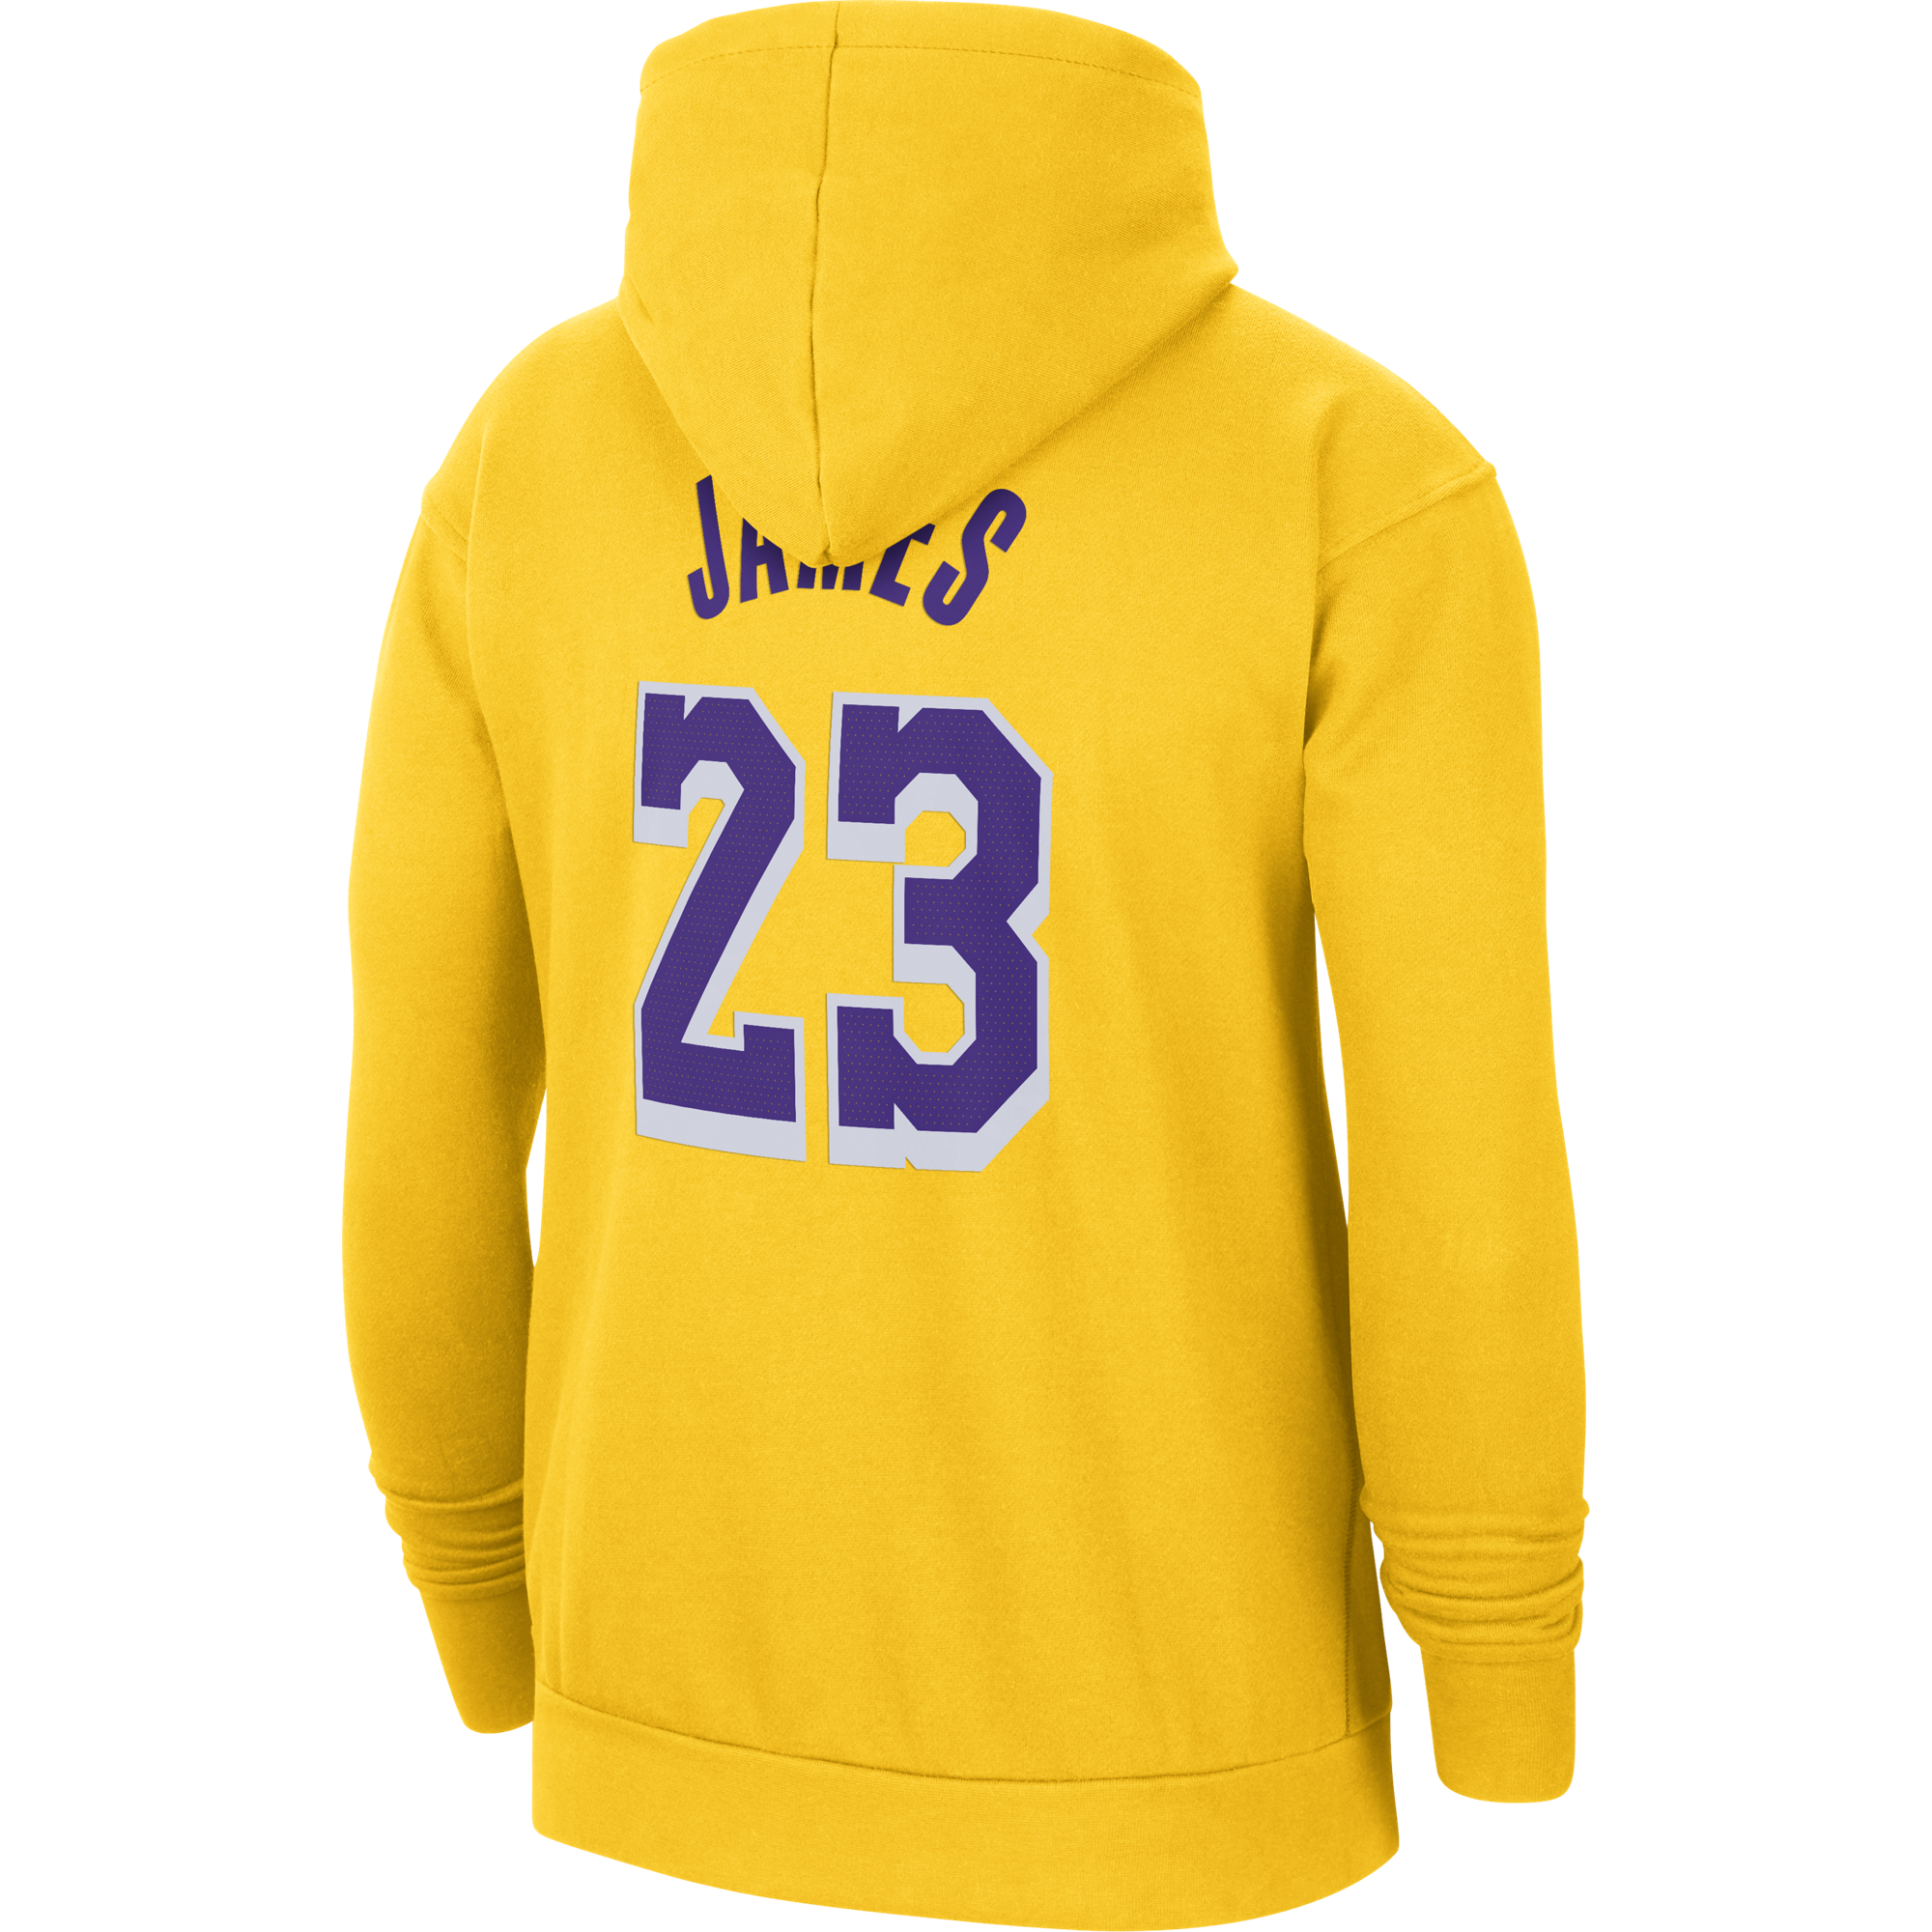 Men's Nike White Los Angeles Lakers 2022/23 City Edition Essential Pullover Hoodie Size: Medium